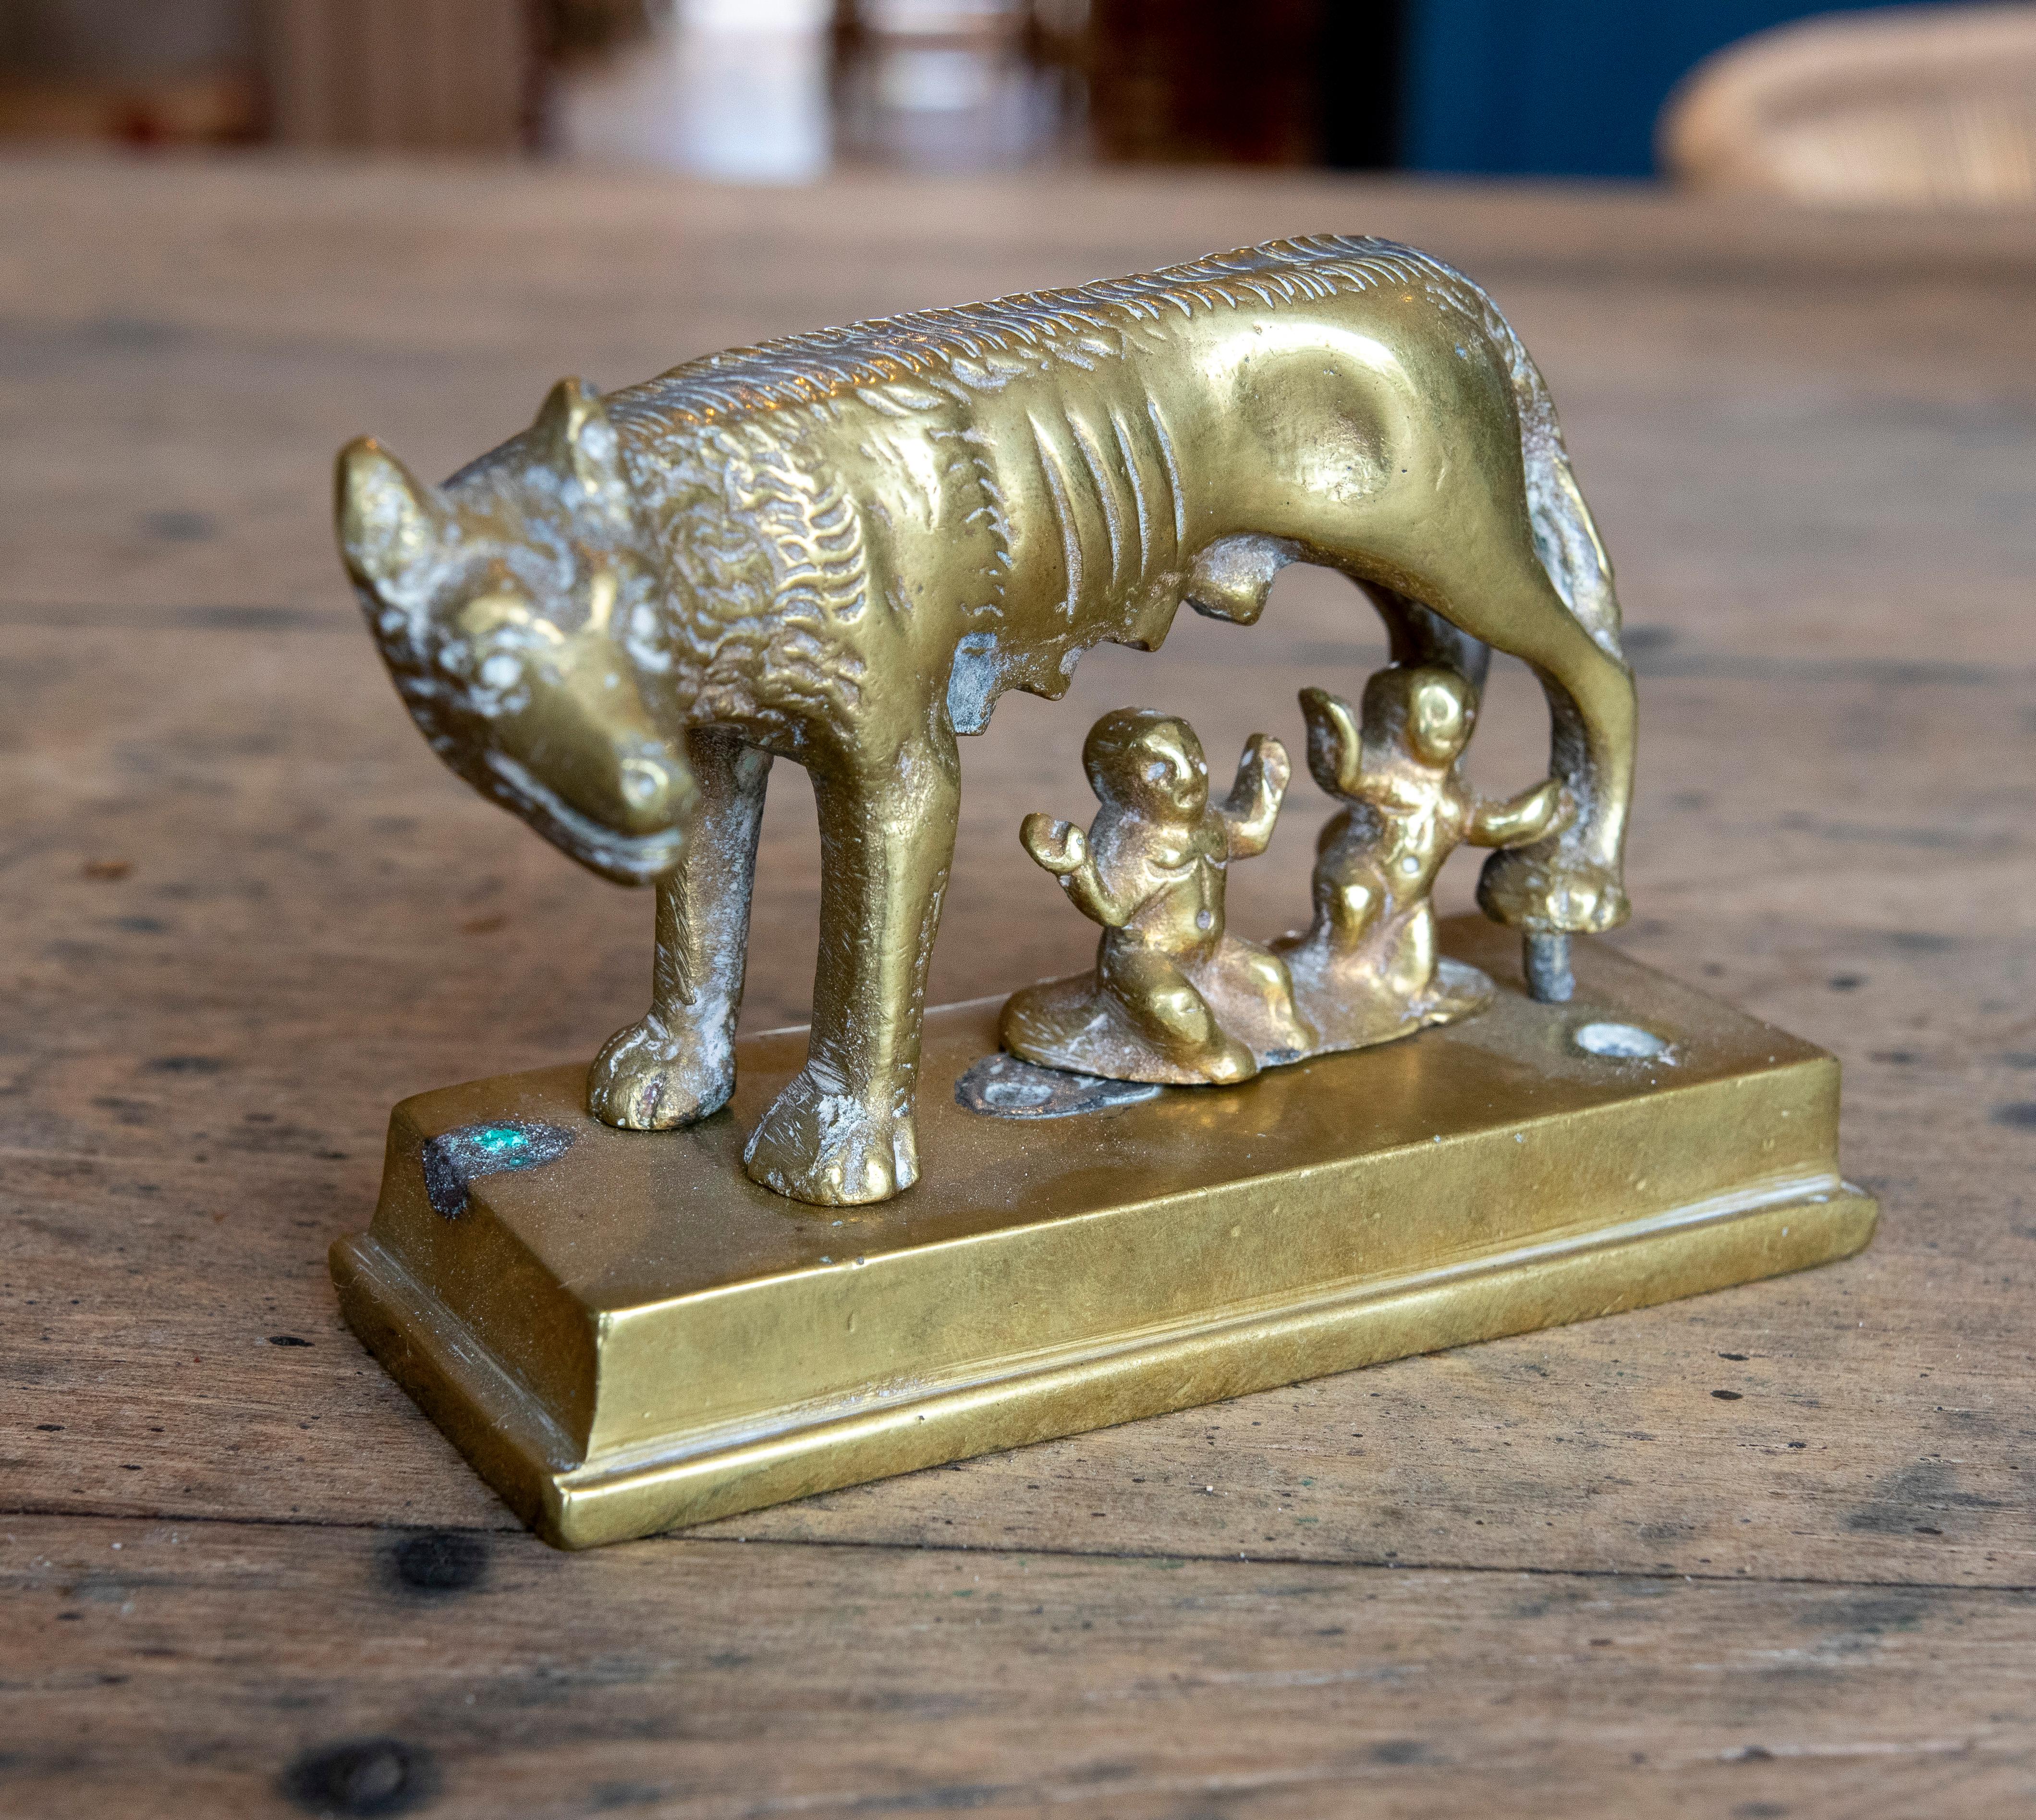 1970s bronze figure of the Capitoline she-wolf symbol of Rome.